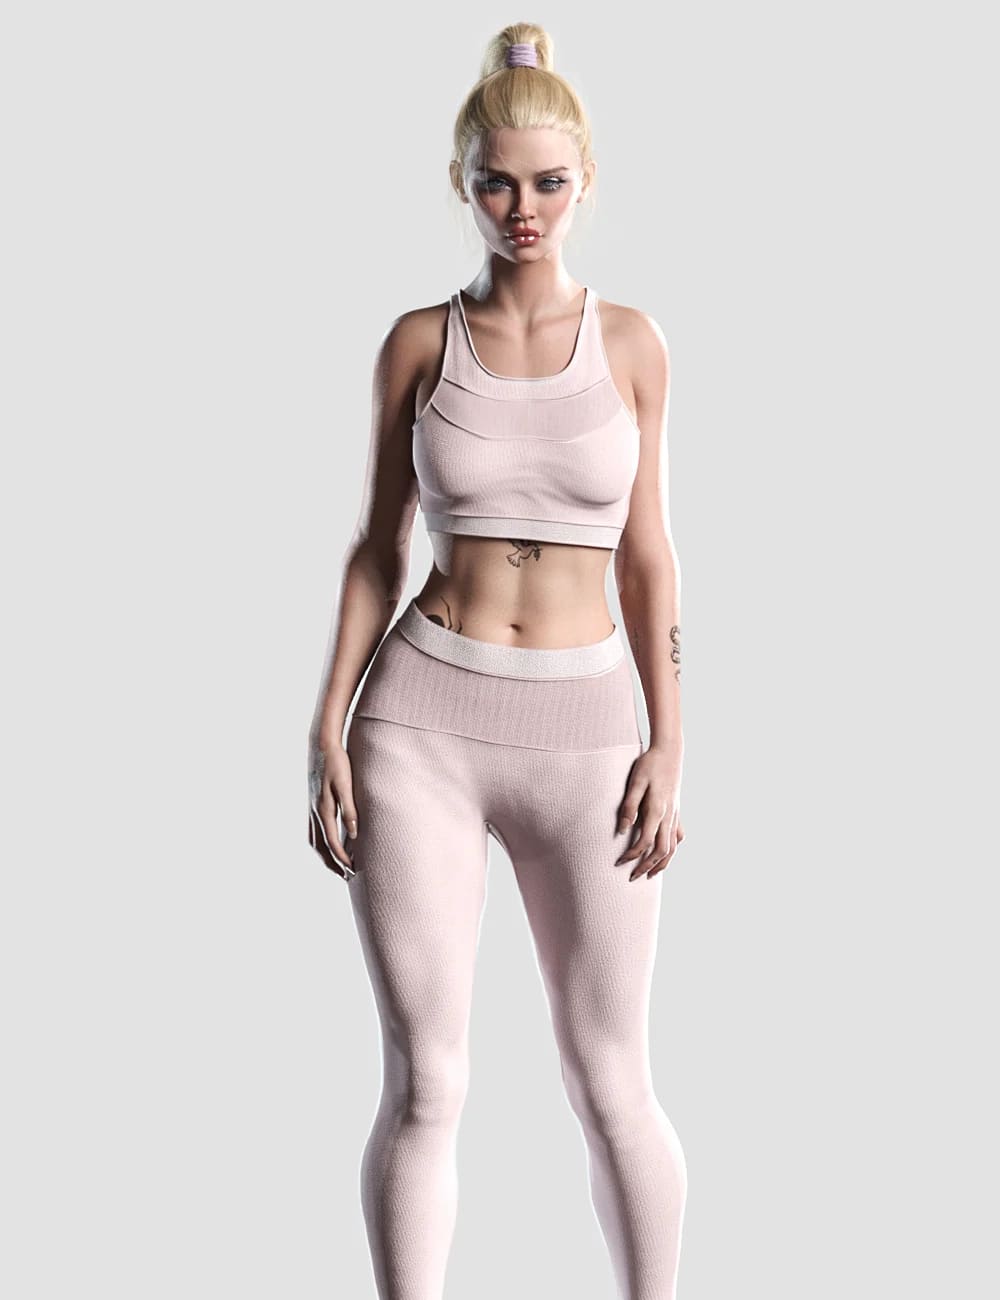 Knit Sports Outfit for Genesis 8 Females_DAZ3D下载站